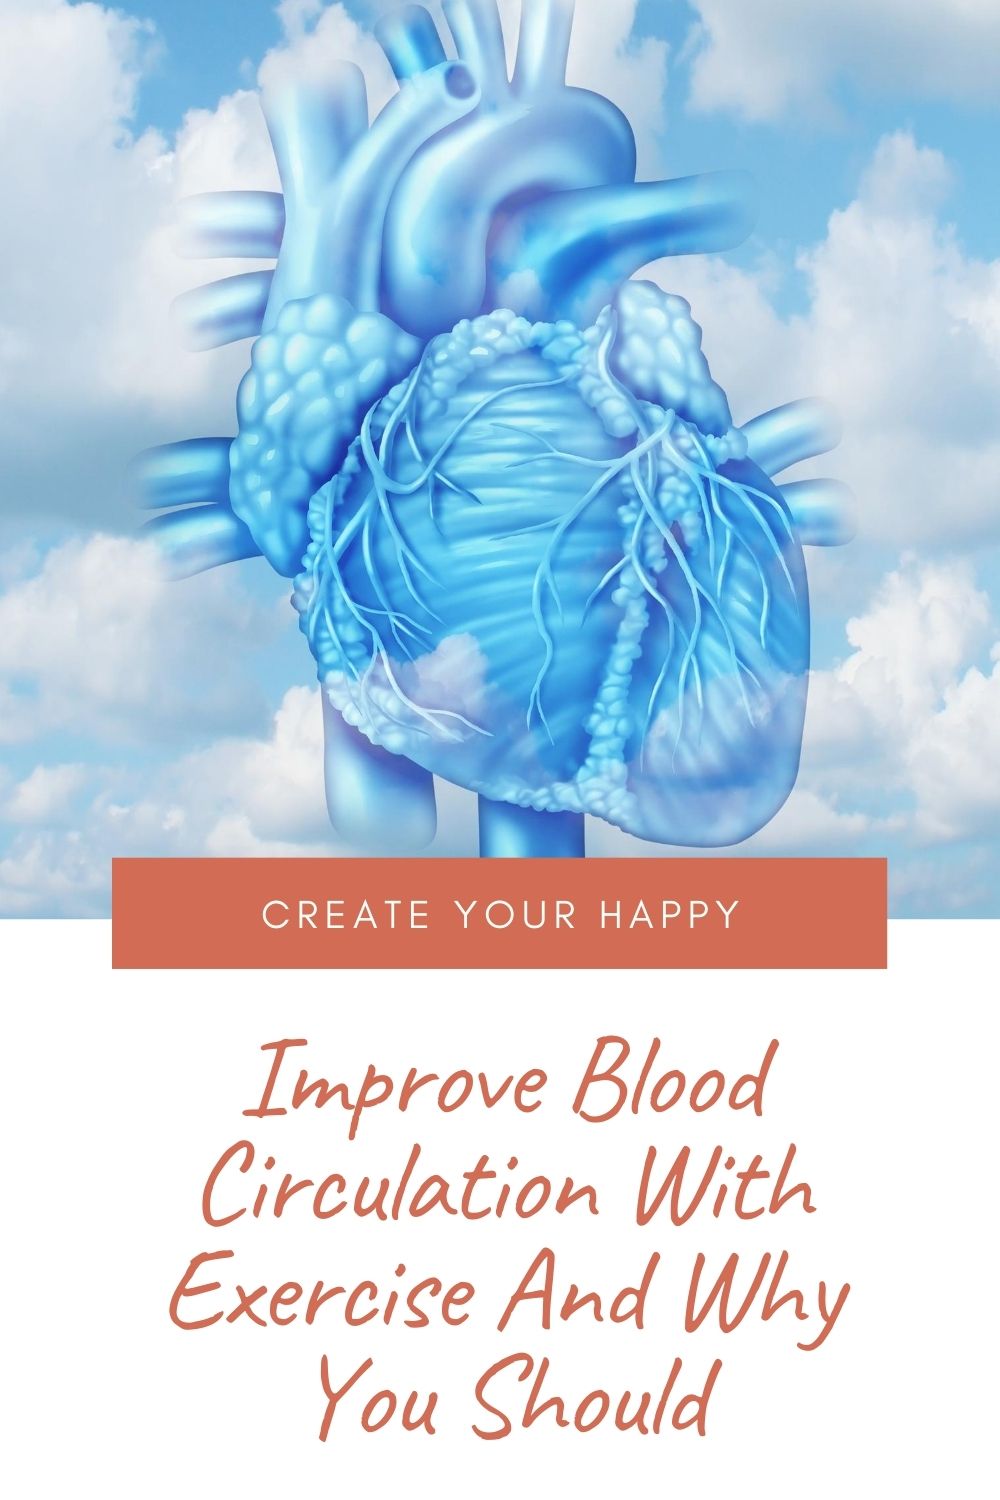 Improve Blood Circulation With Exercise And Why You Should